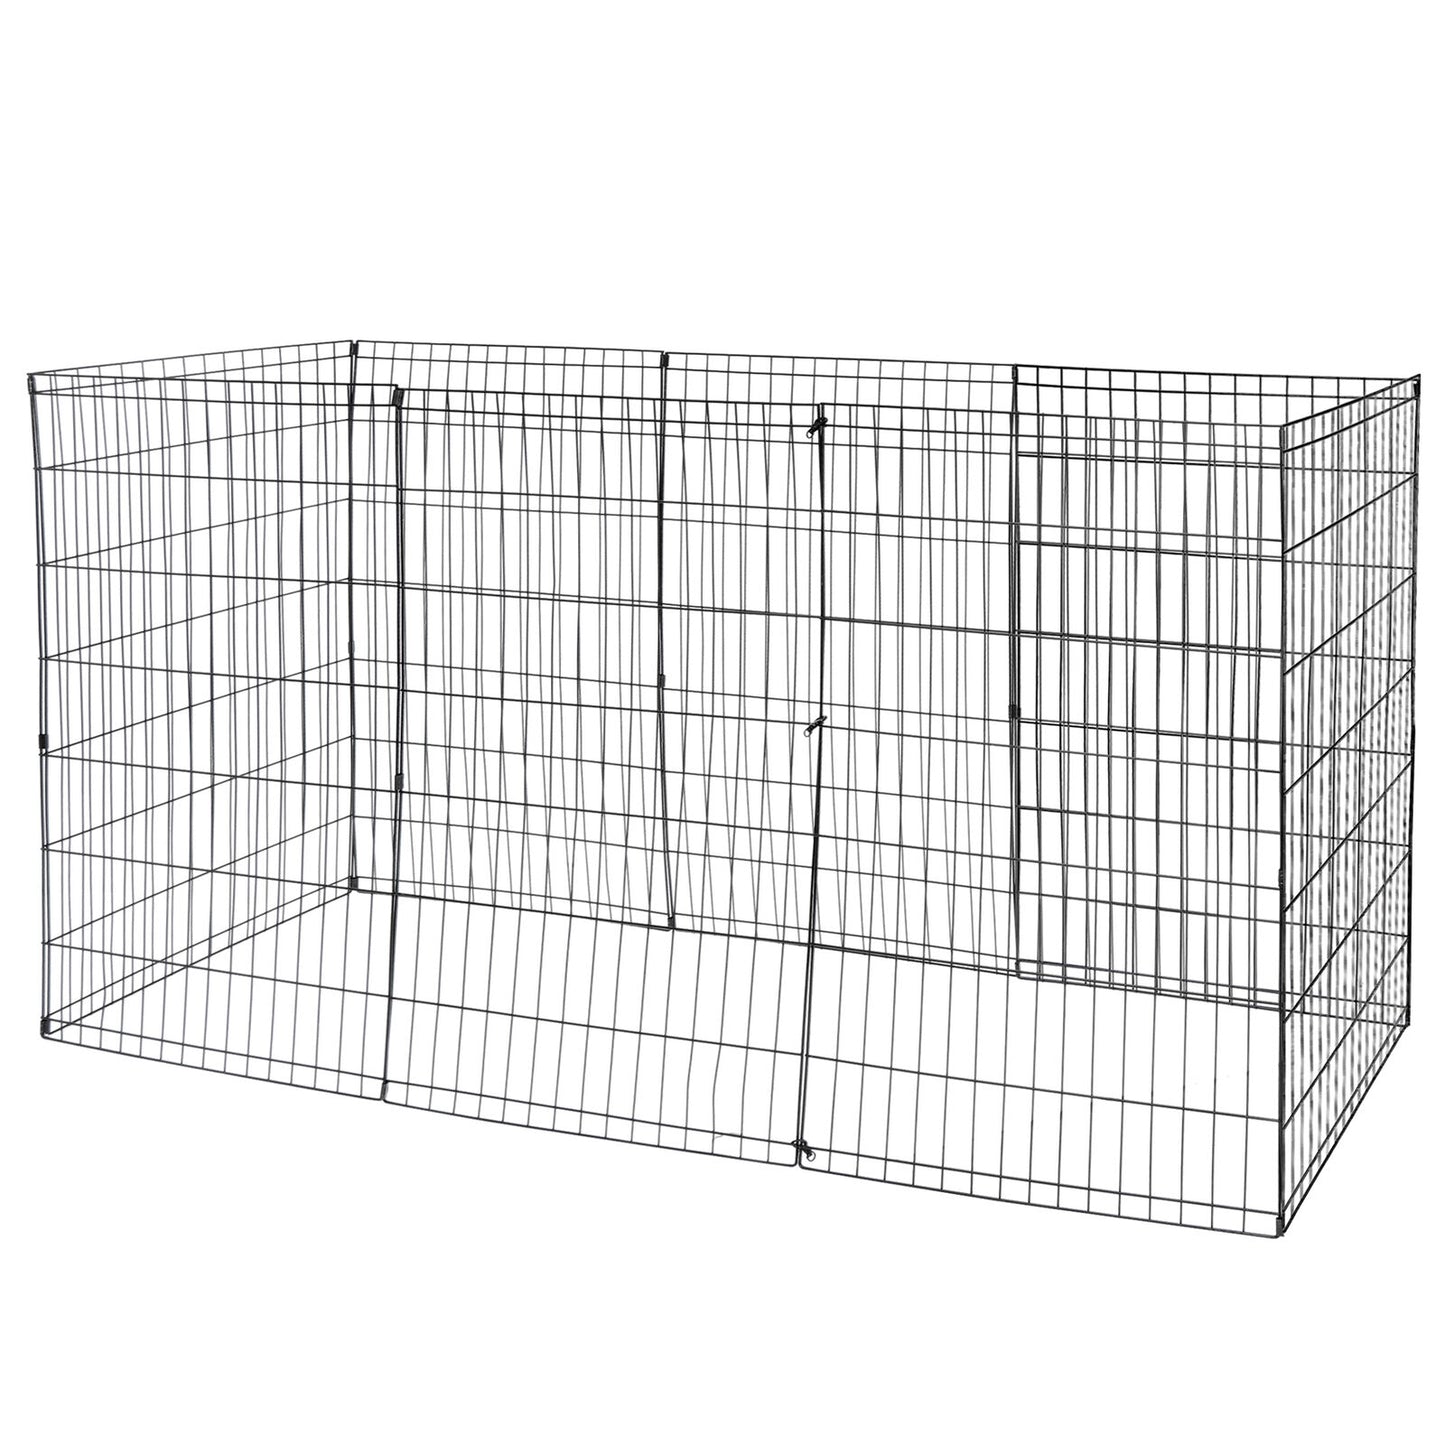 42" 8 Panels Dog Playpen Pet Fence Crate Cage Kennel Metal Exercise Pen Foldable